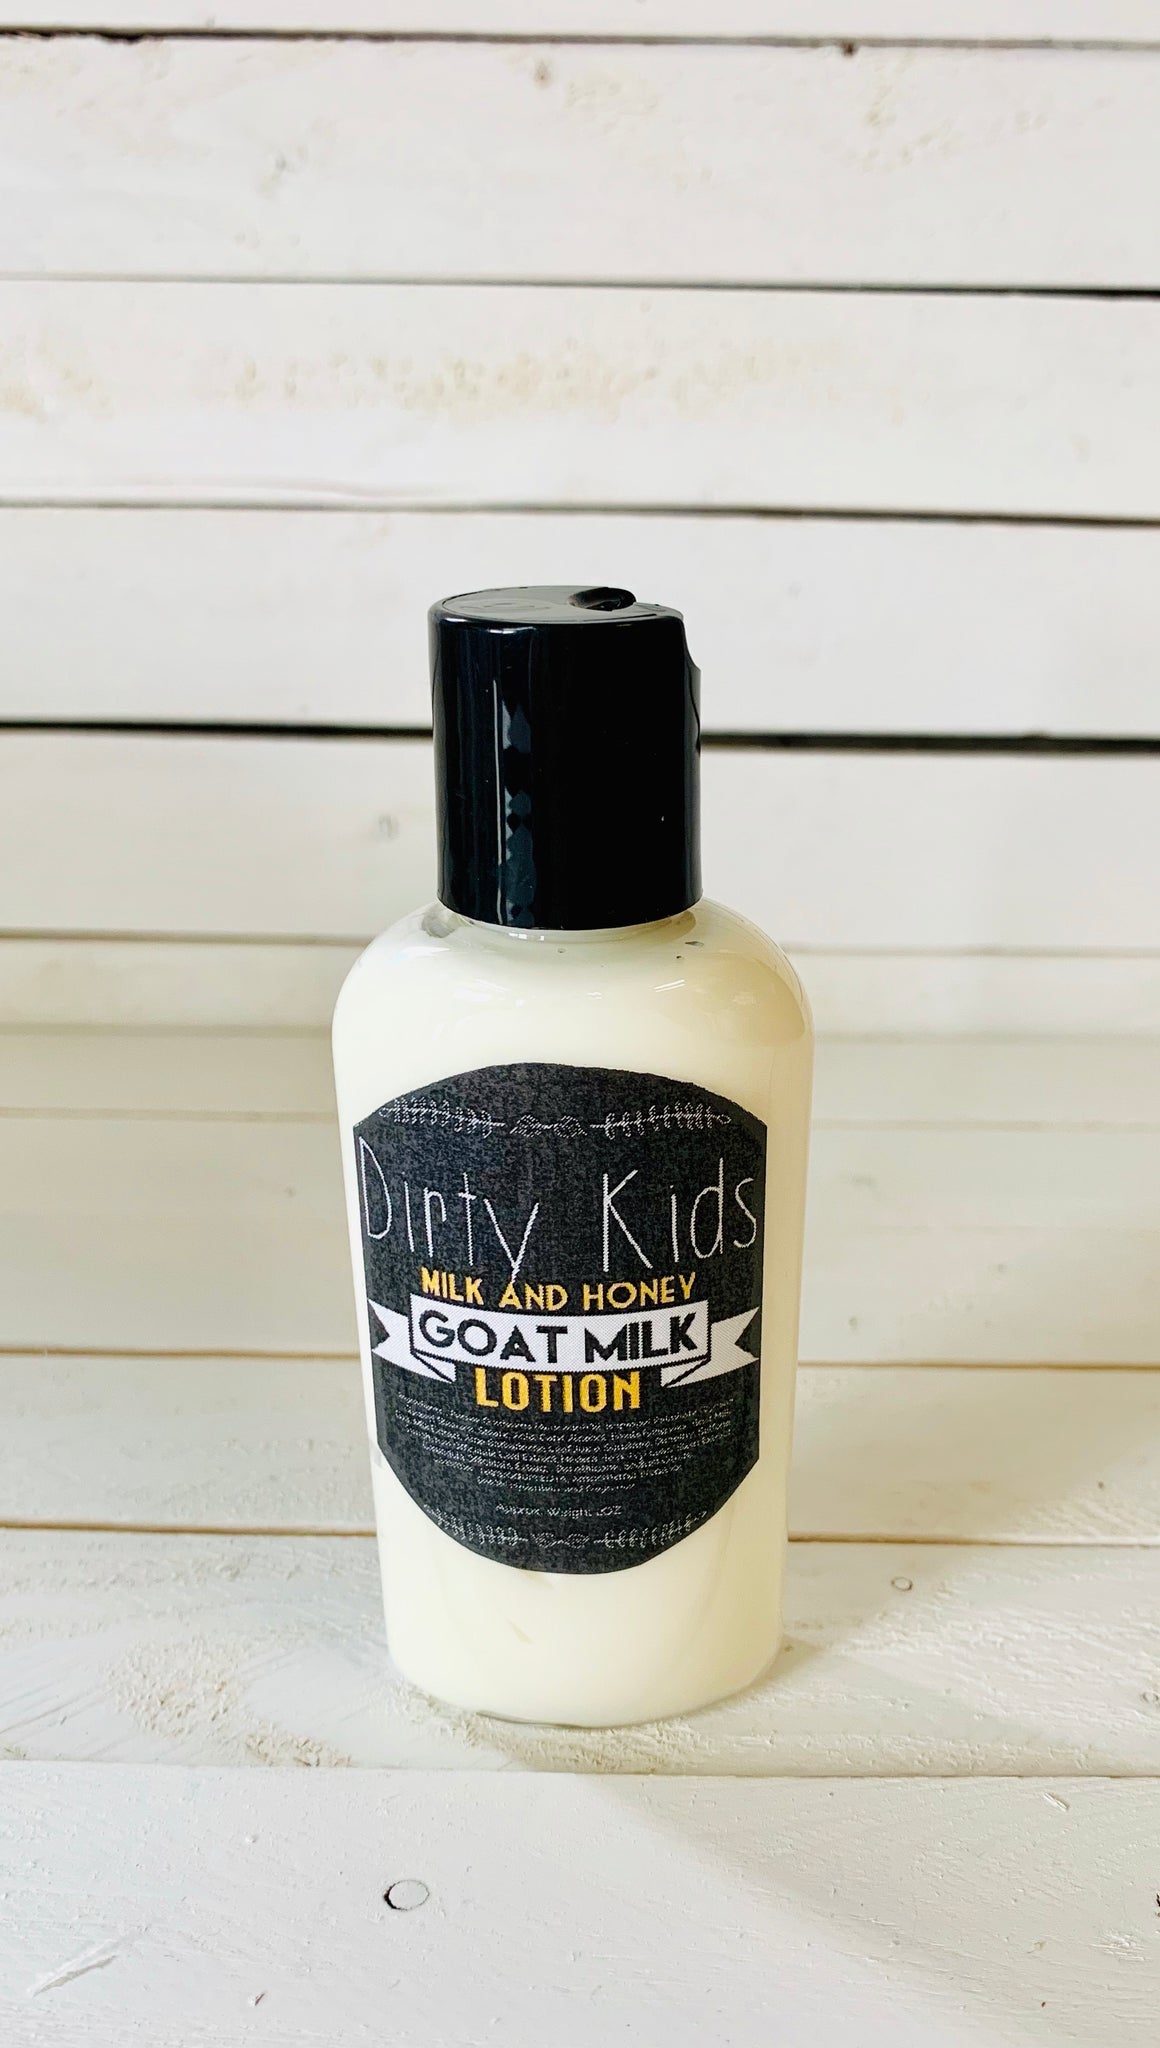 GOATS MILK ALL NATURAL LOTION